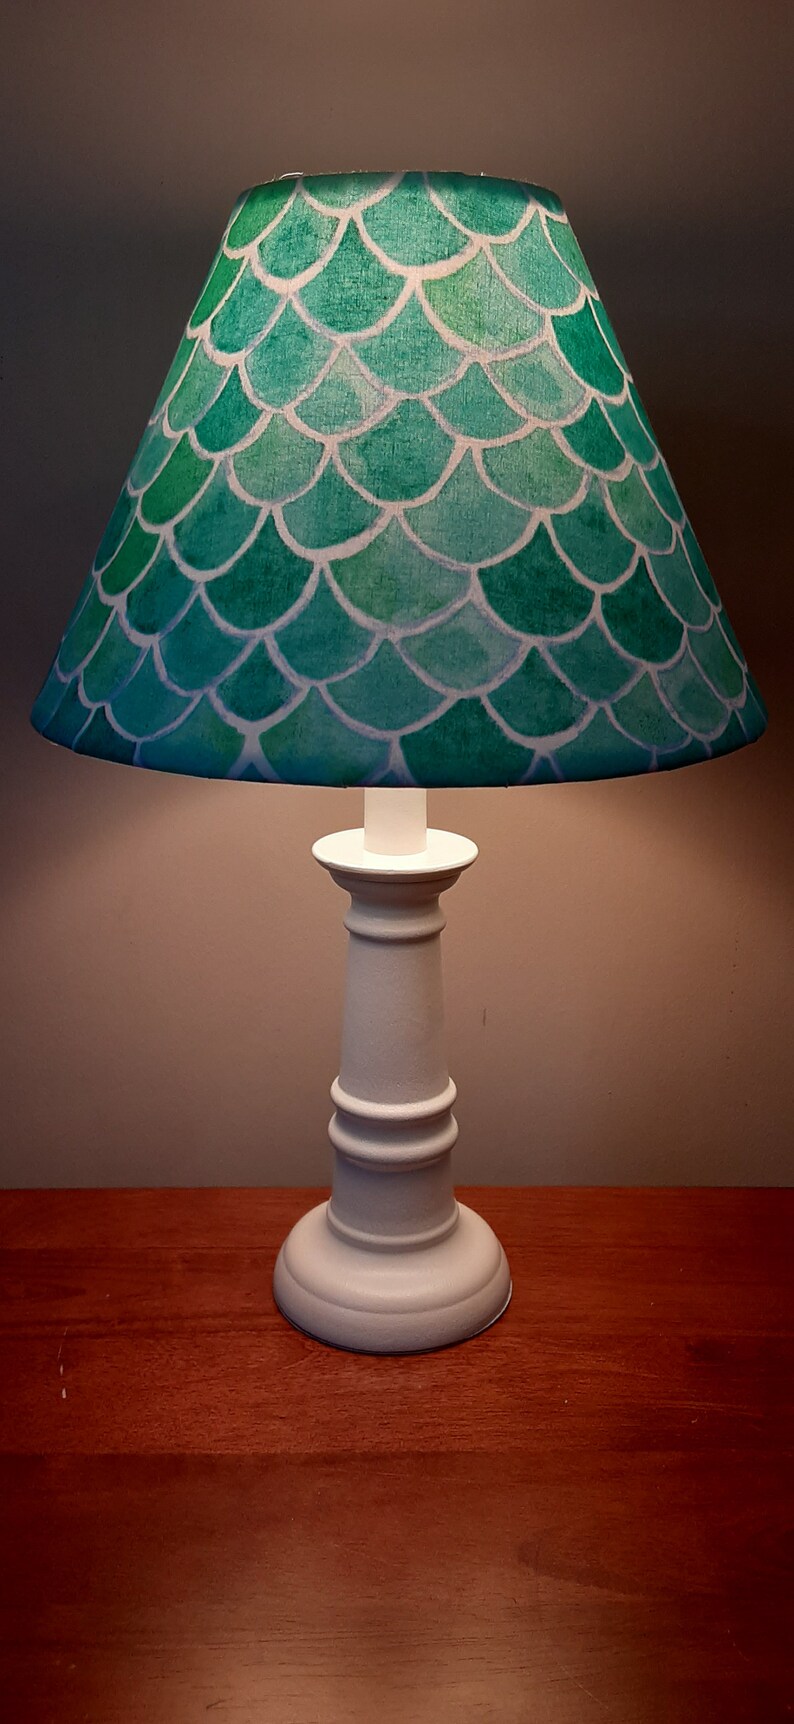 Mermaid accent Nursery lamp, mermaid scales teal turquoise accent lamp, nautical Nursery lamp, Beach House Seashore accent table lamp image 2